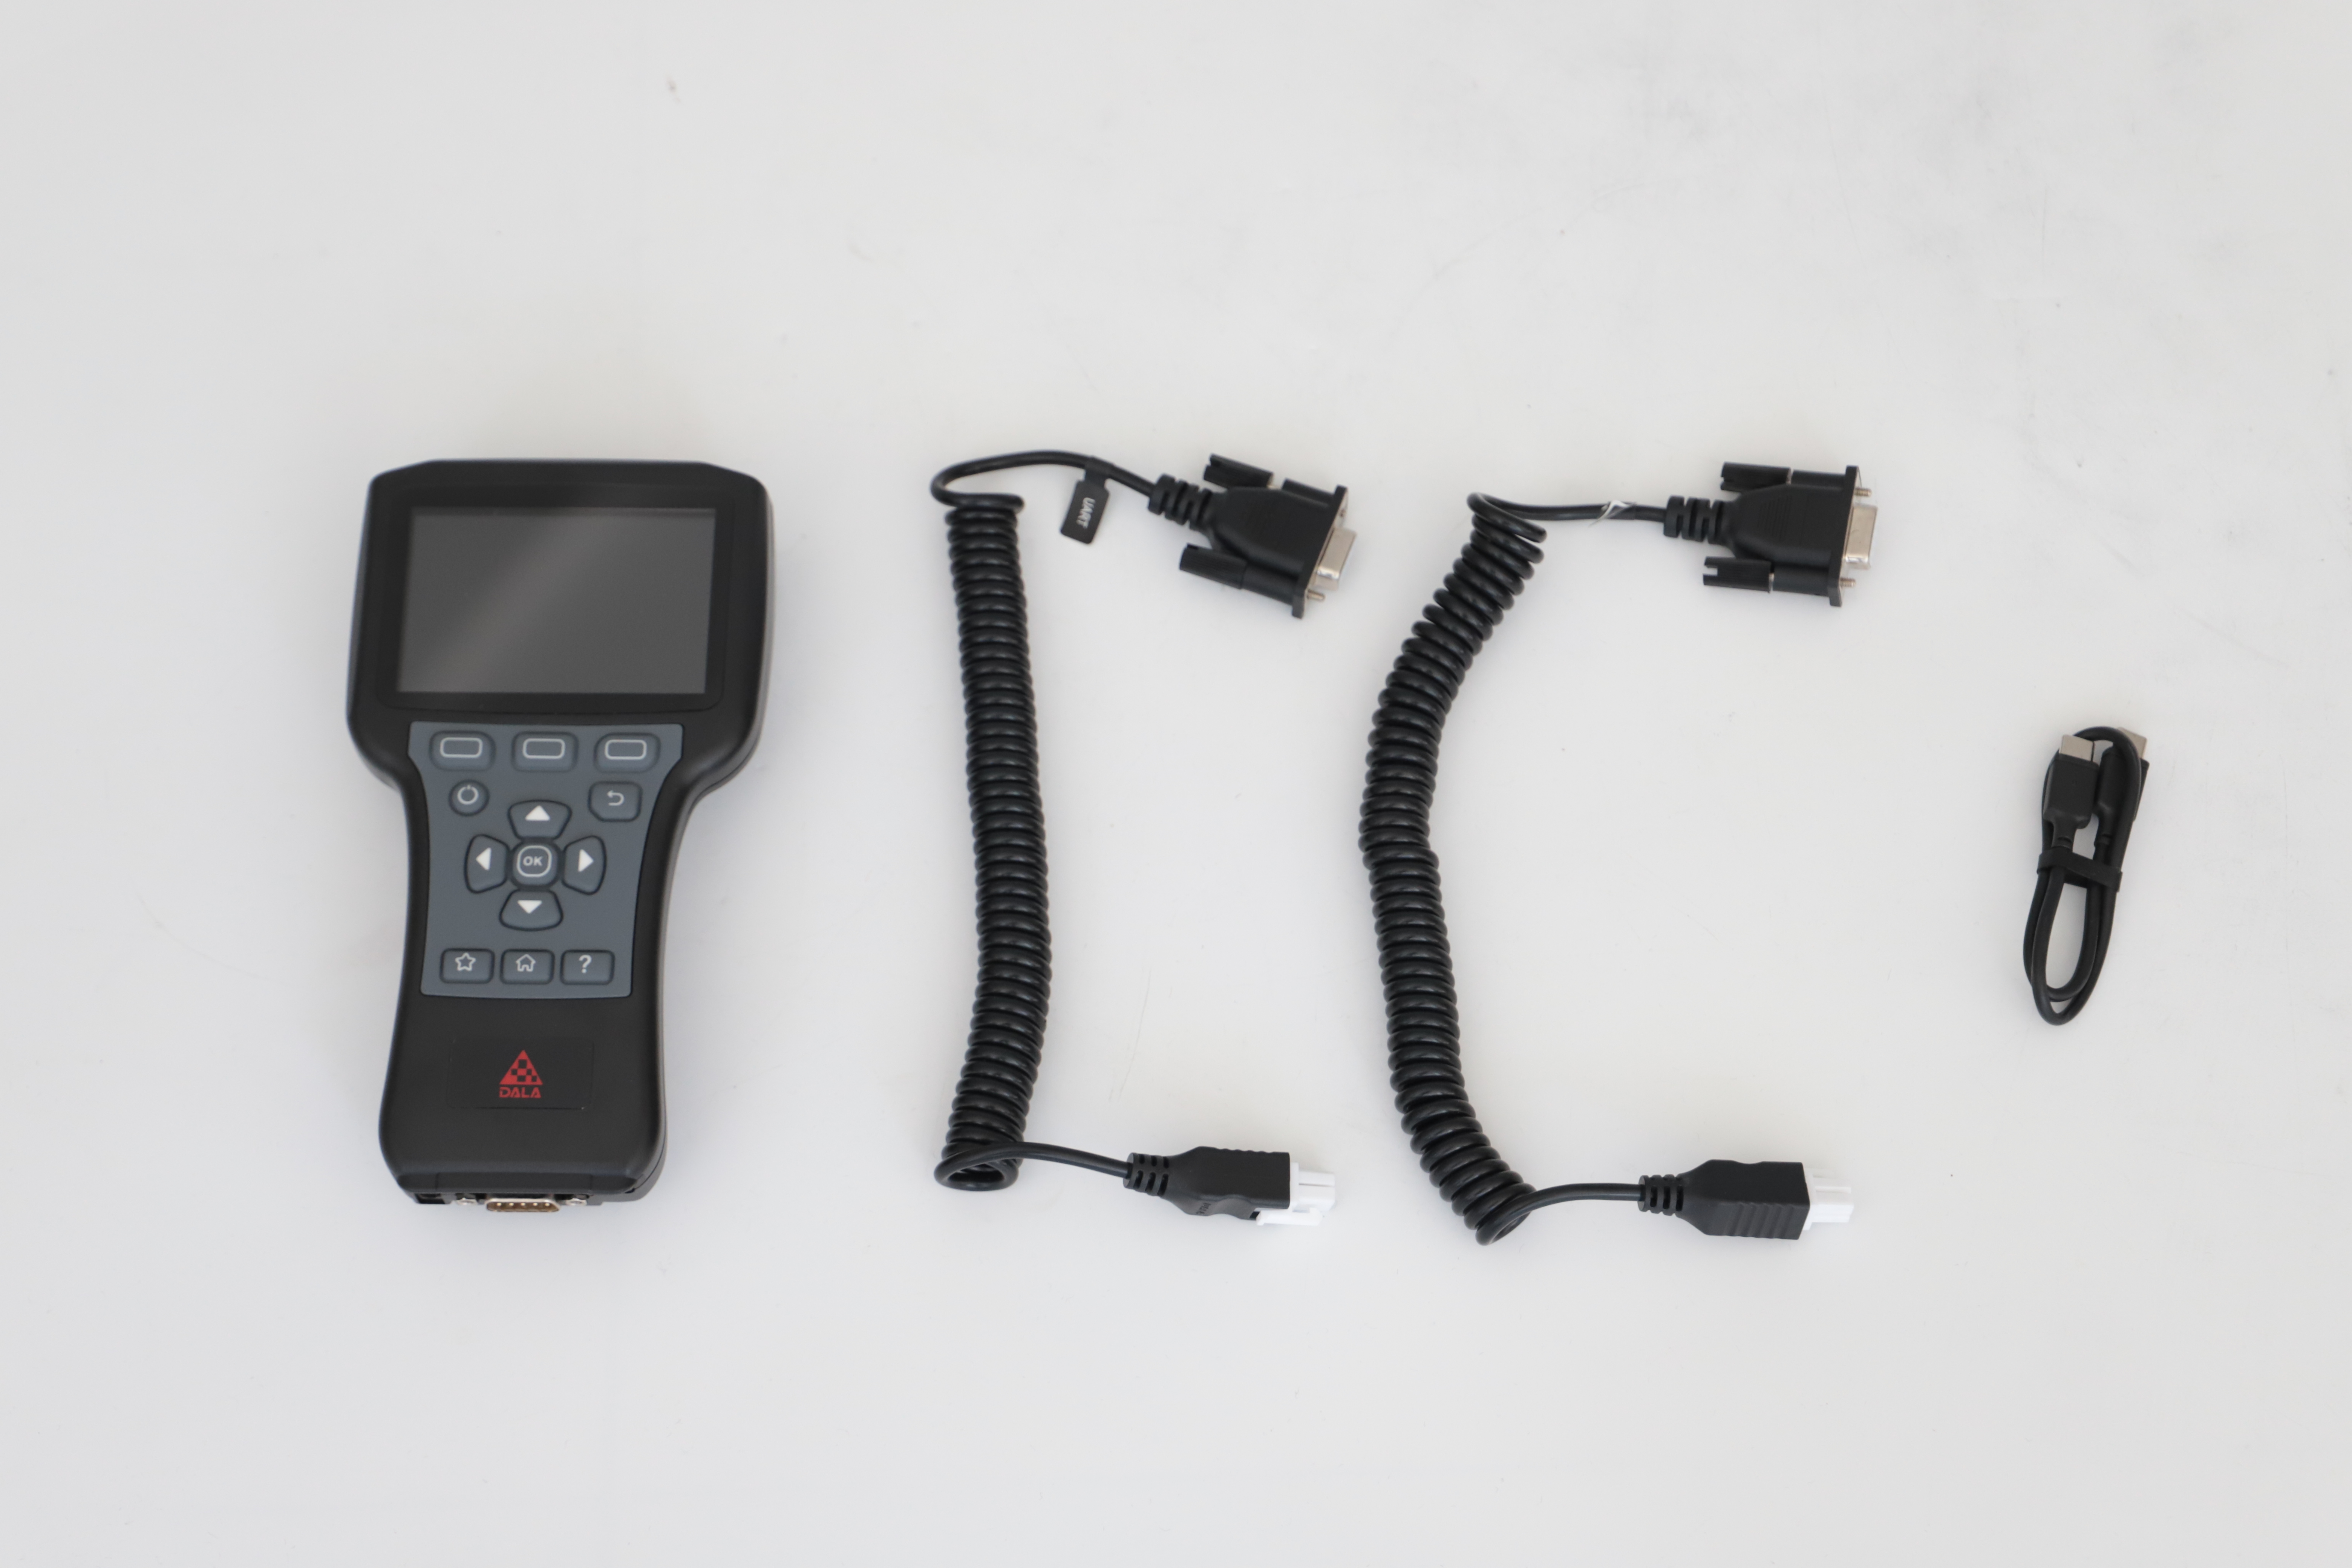 DS13 china made curtis controller handheld programmer